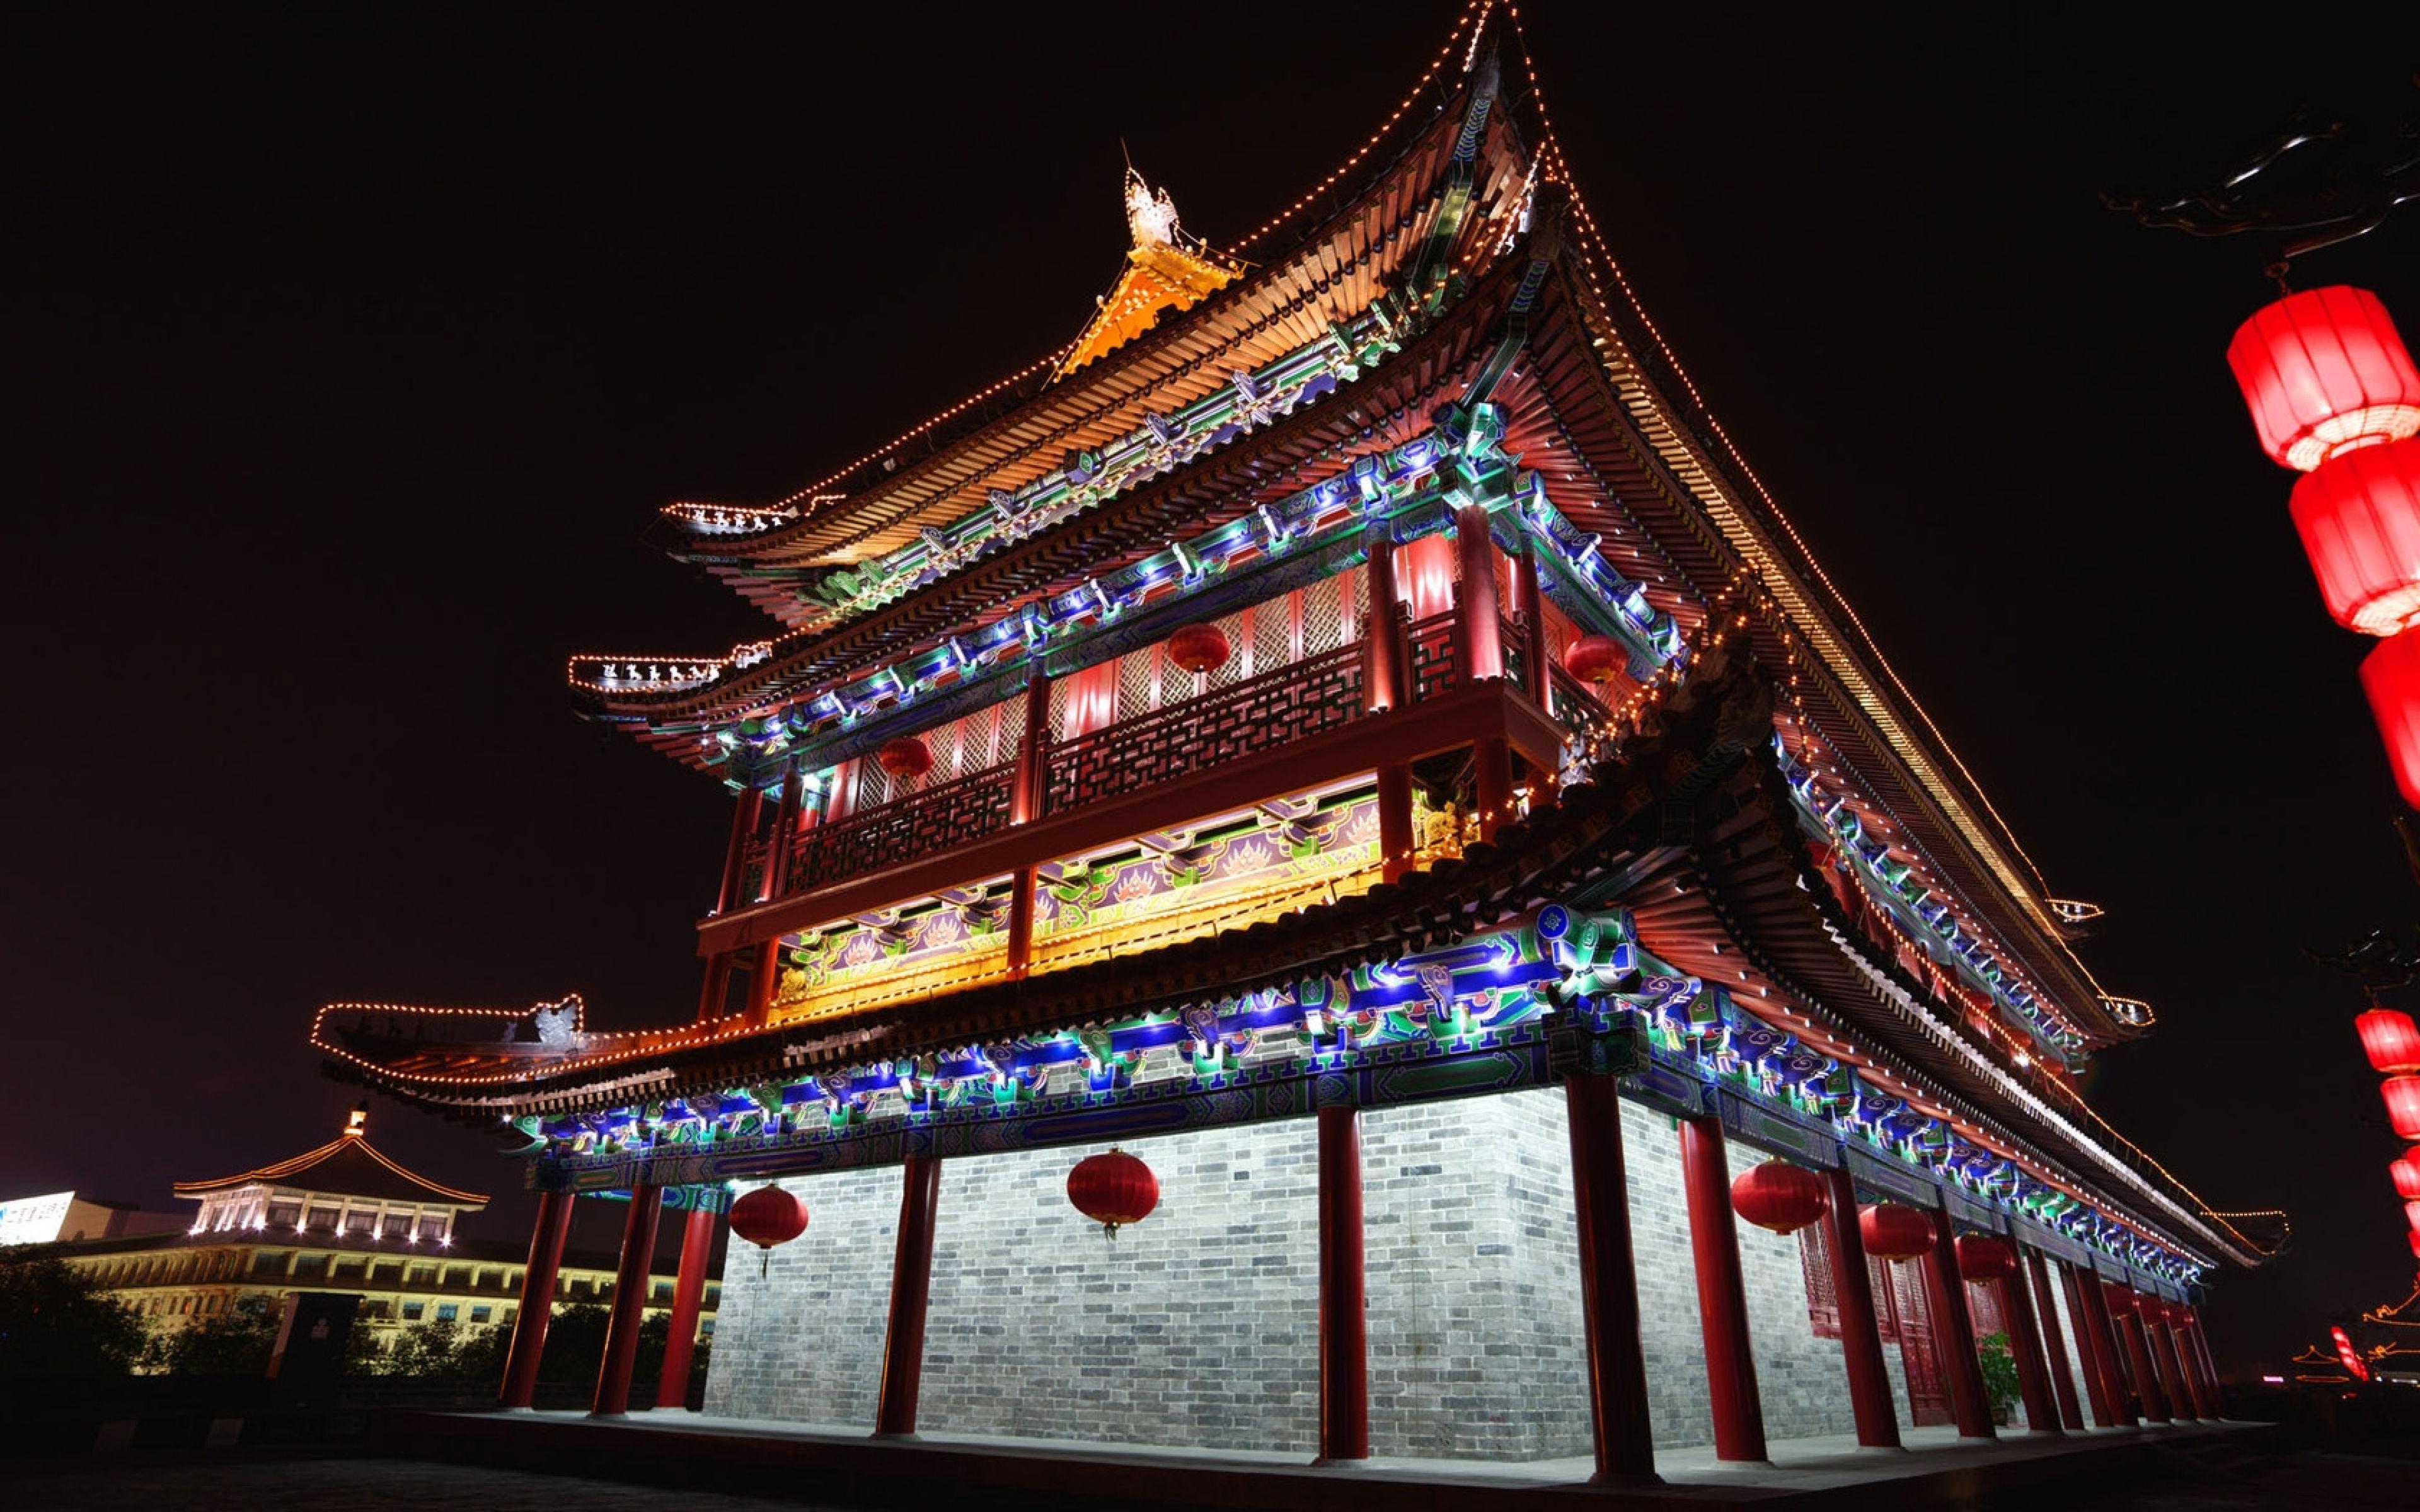 Download Wallpaper 3840x2400 Beijing, China, Chinese architecture